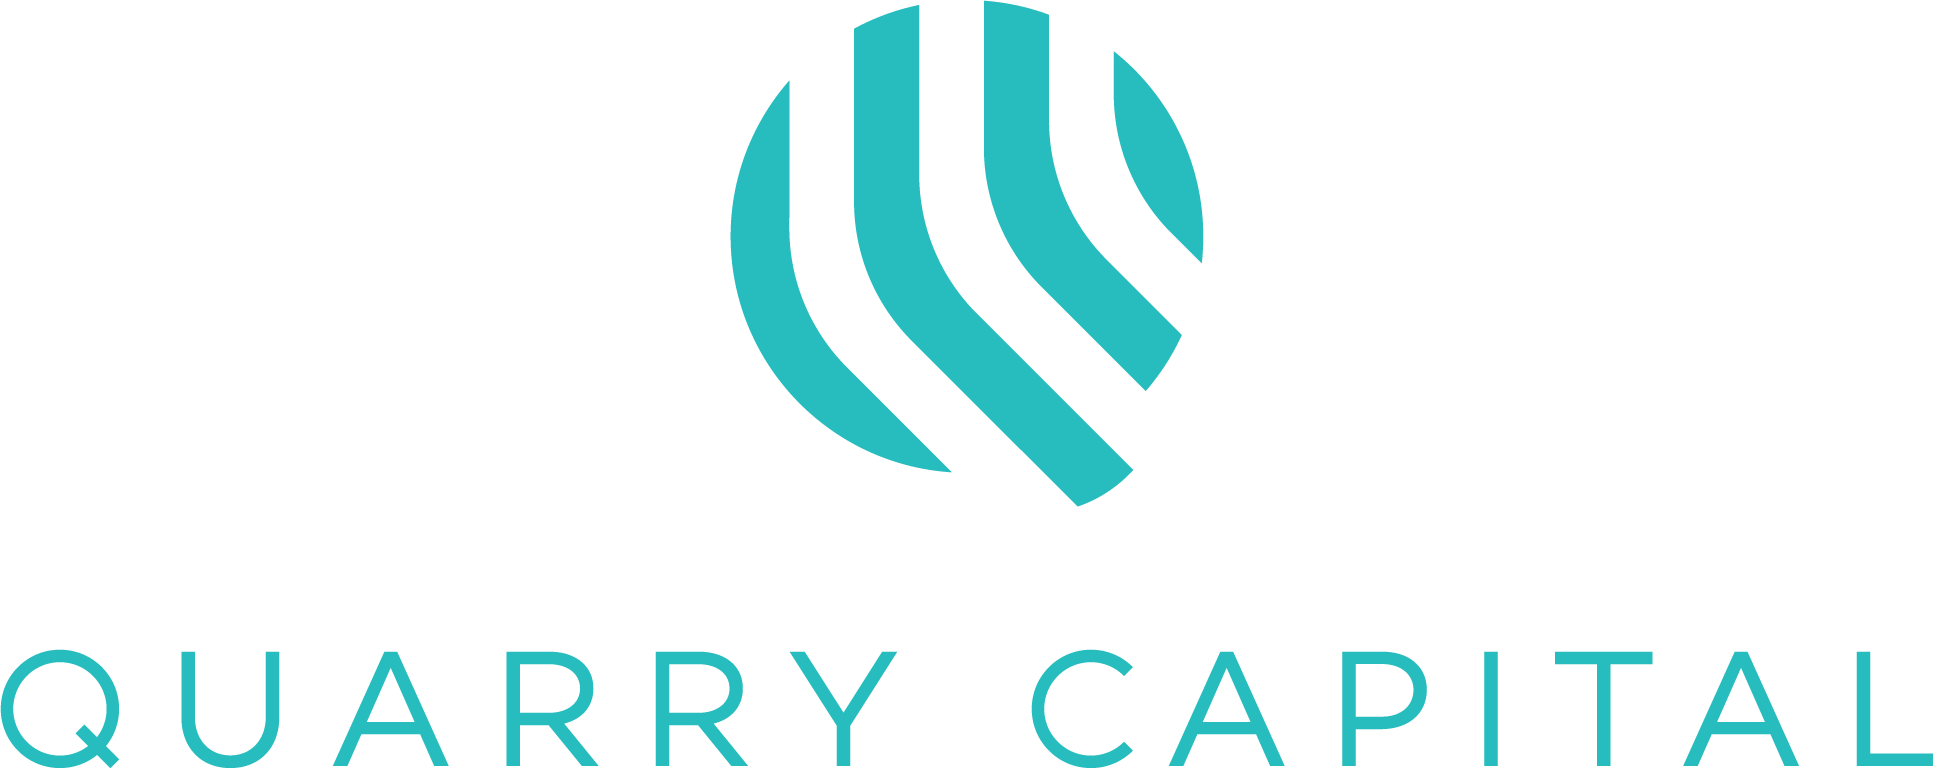 Primary Logo - Teal.png